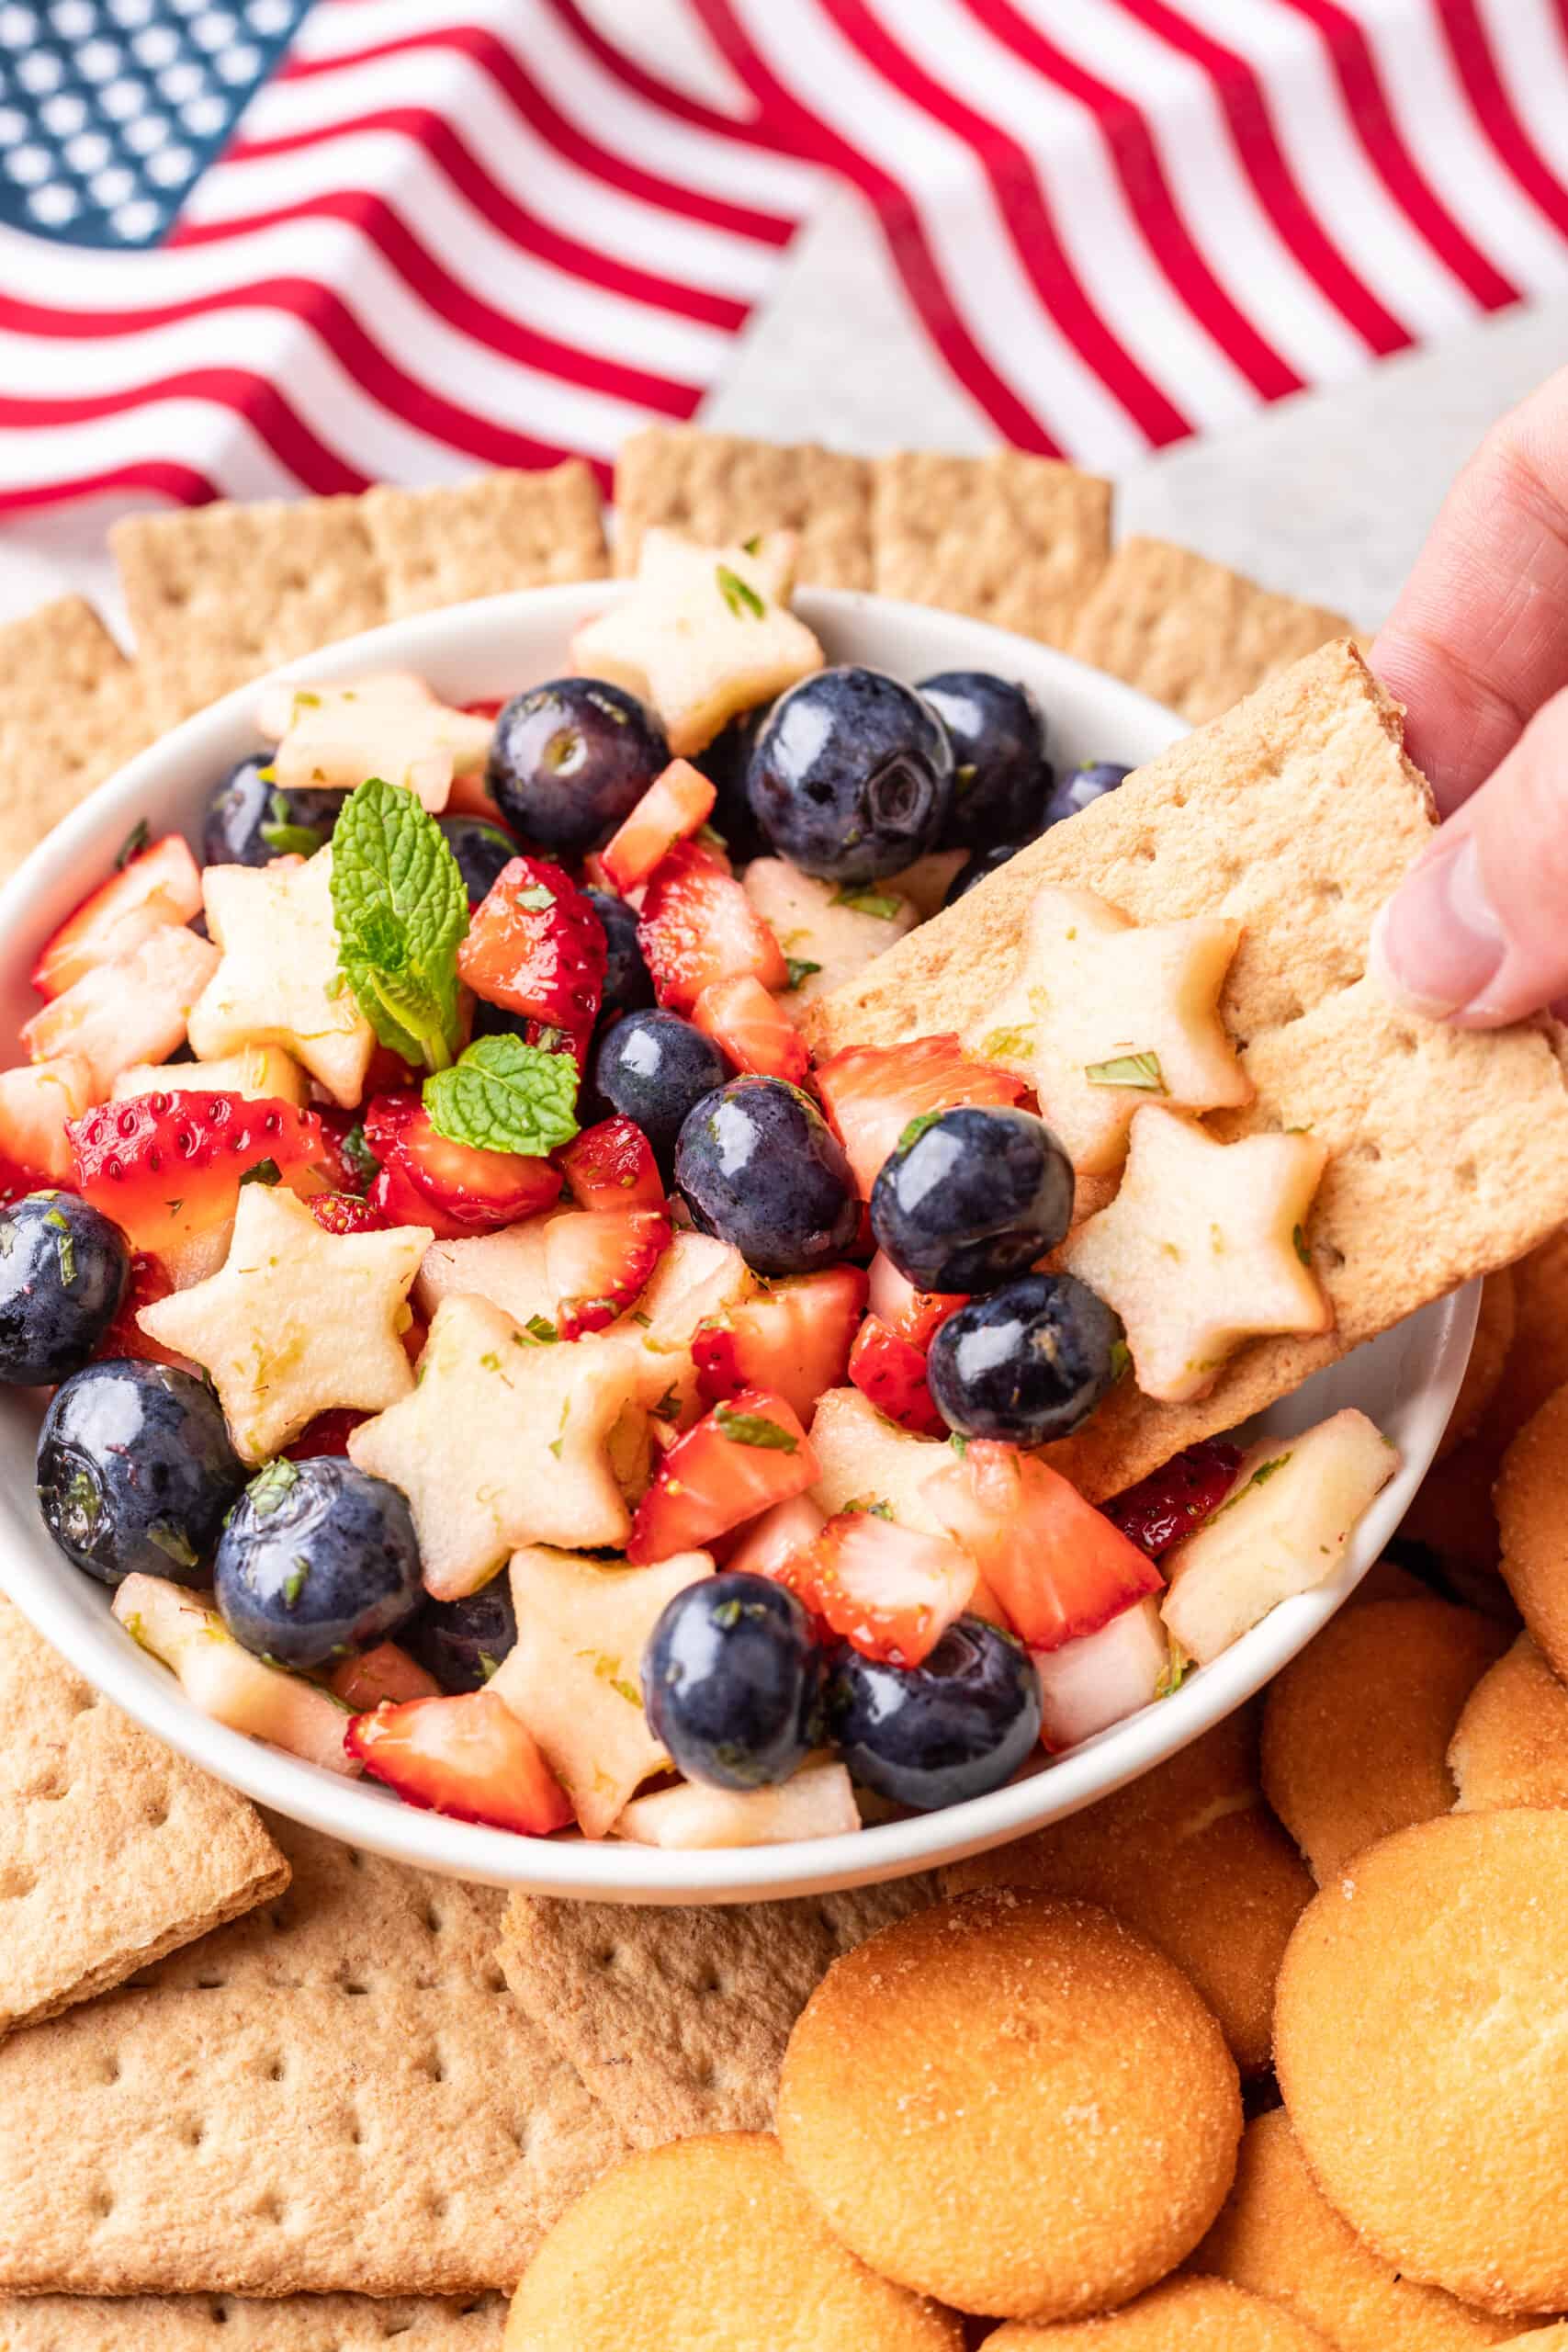 A hand scooping a graham cracker into a bowl of red, white, and blue fruit salsa.